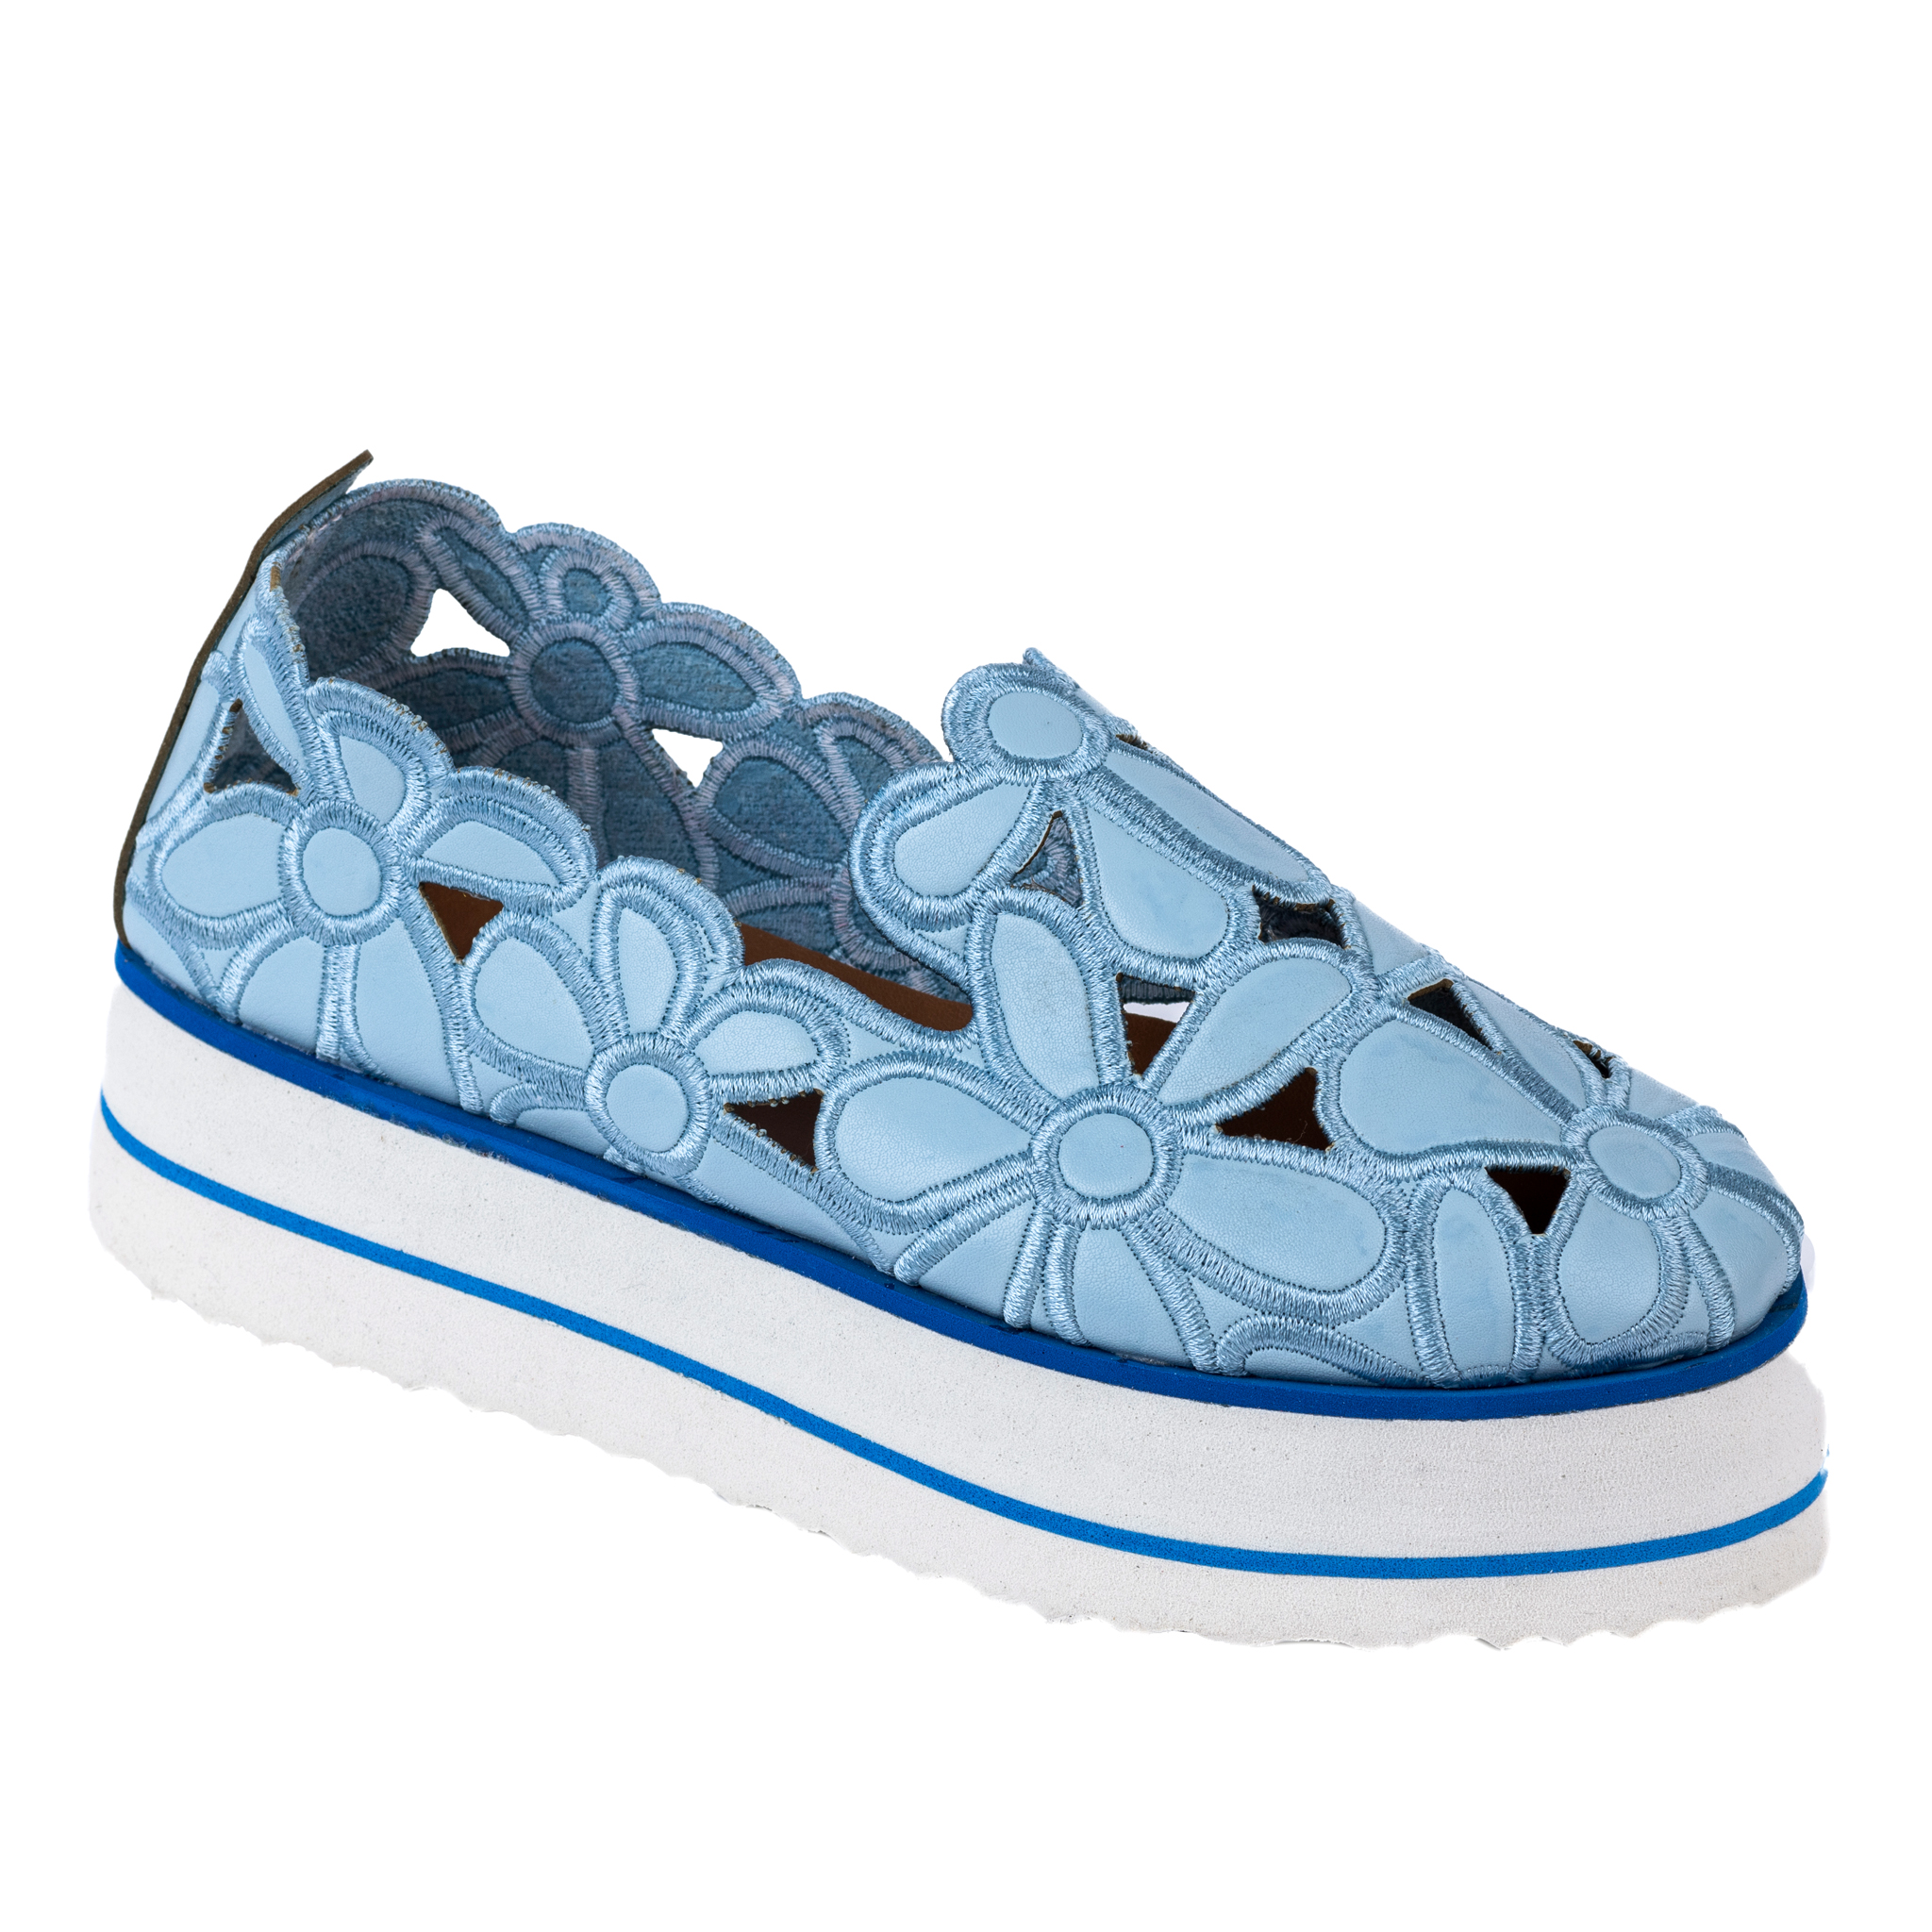 FLOWER PRINT SHOES WITH HIGH SOLE - BLUE